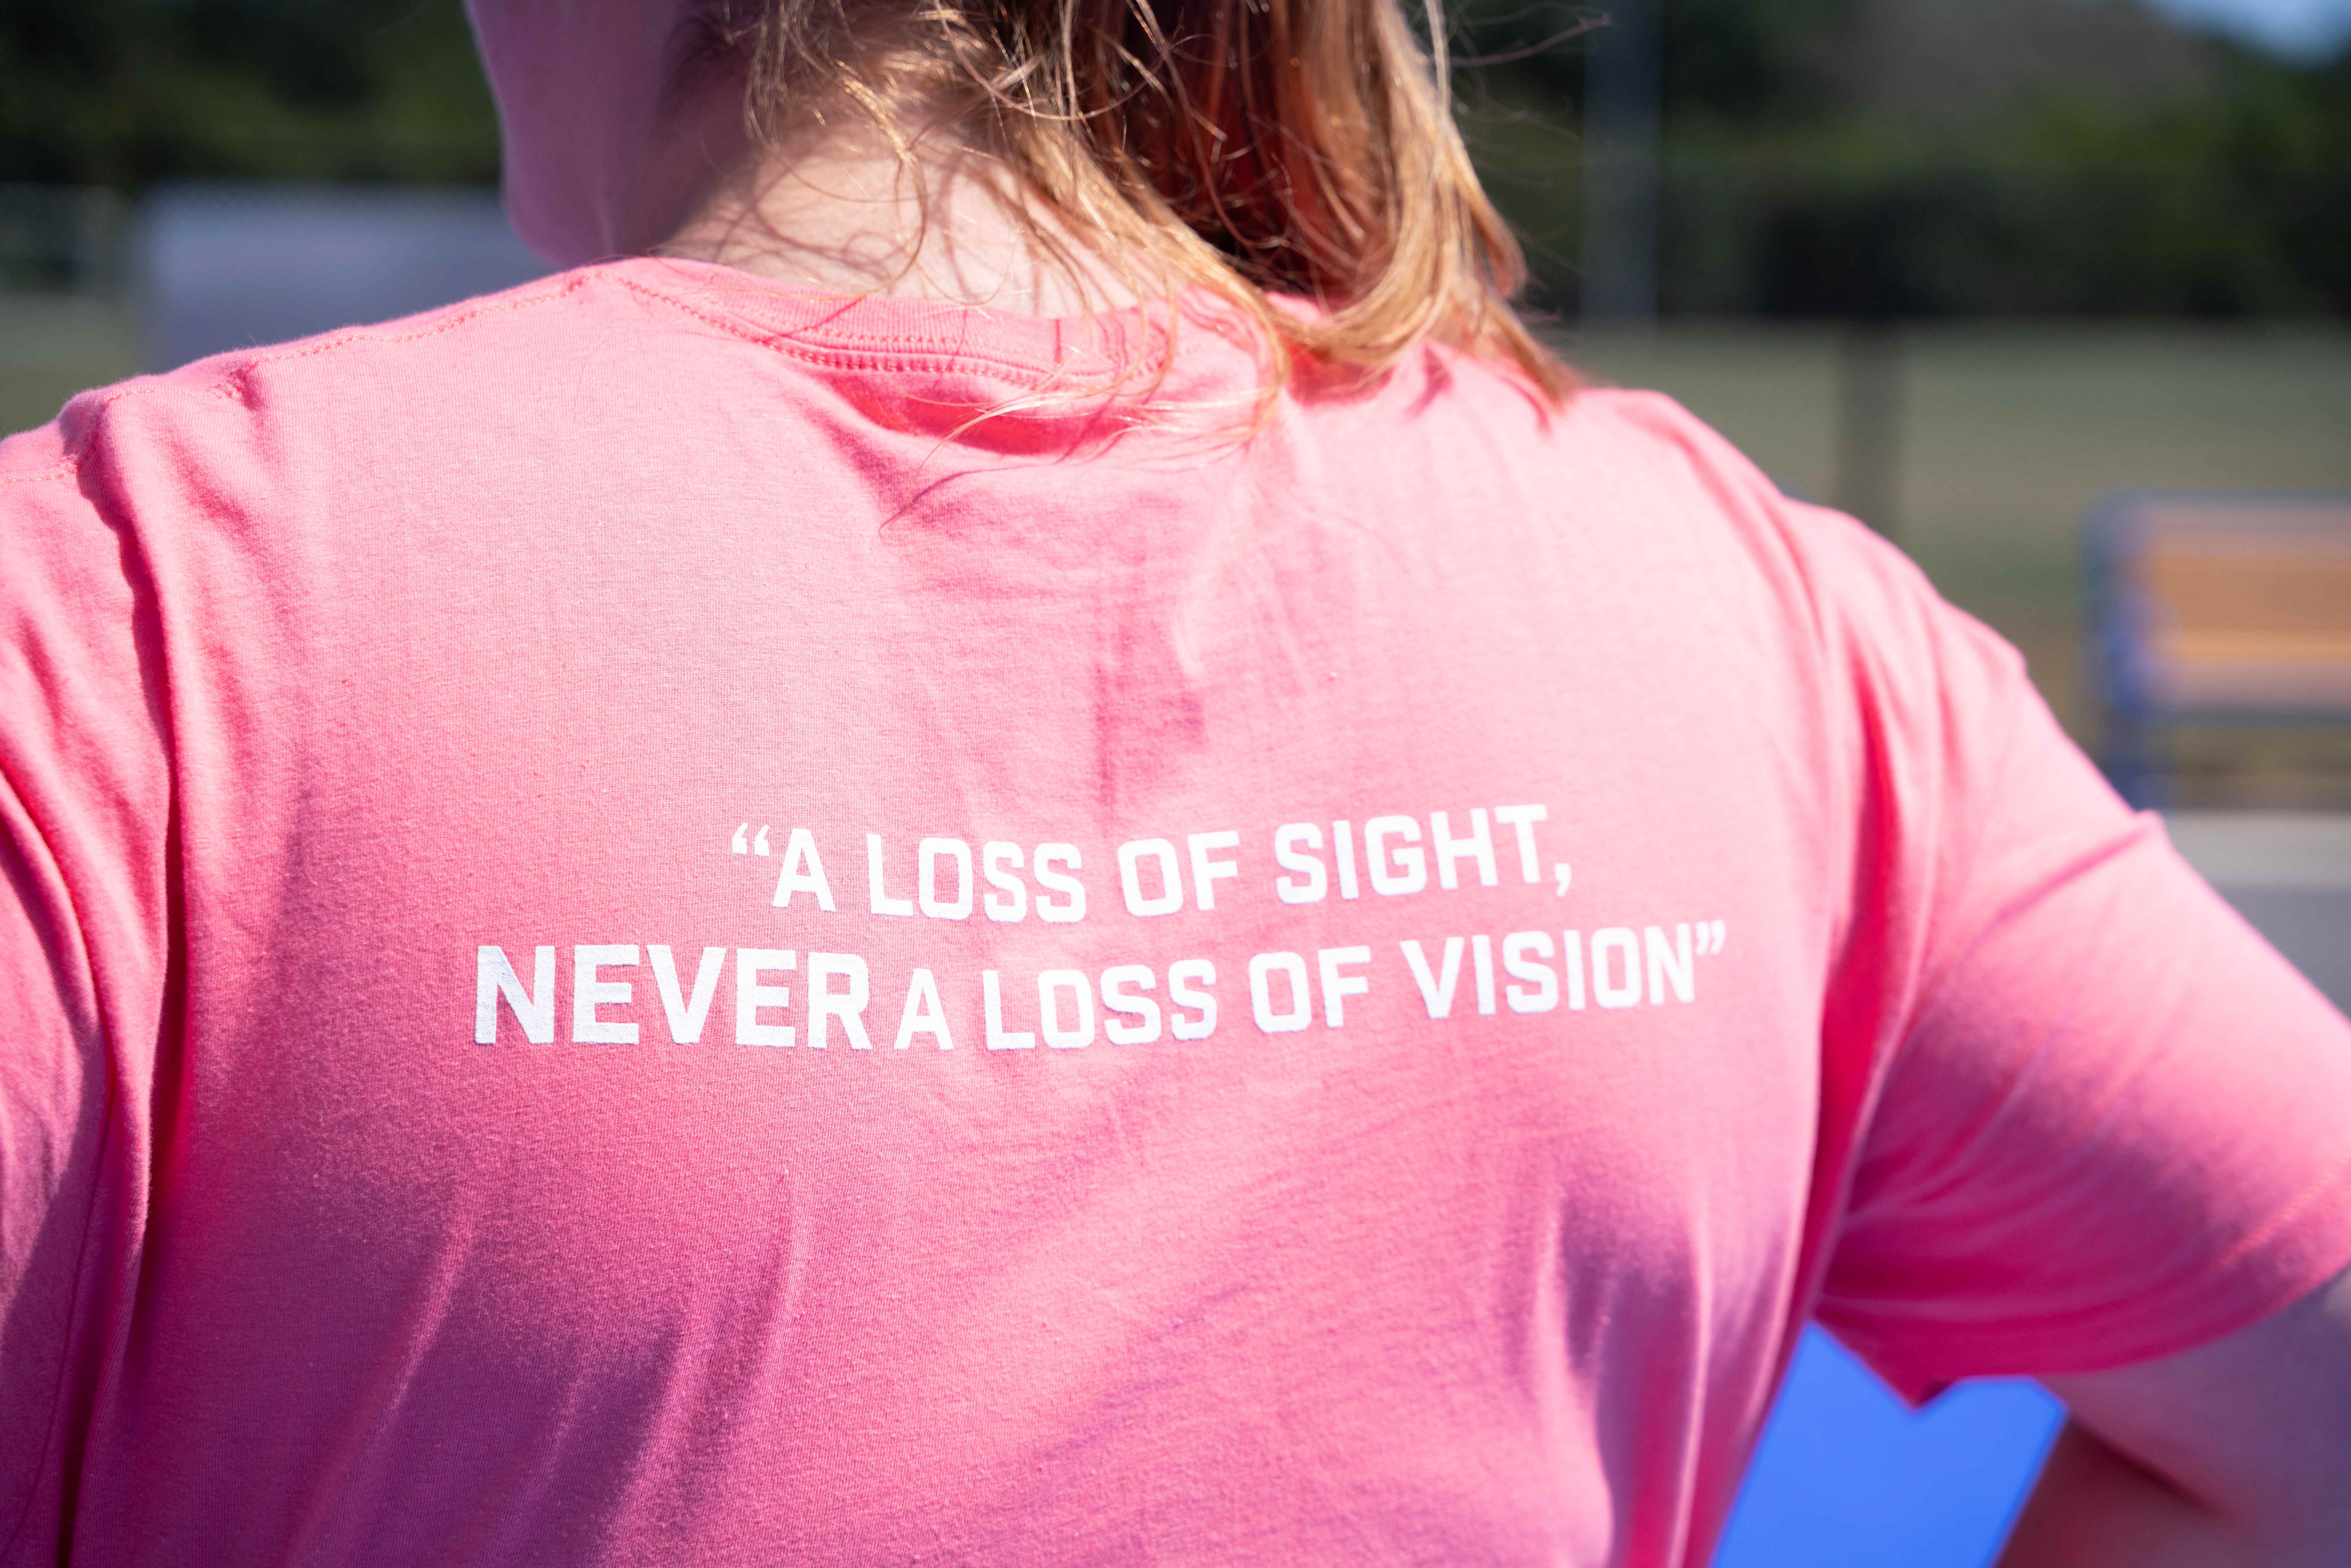 Photo of the back of a coach's shirt with the Camp Abilities motto: "A loss of sight, NEVER a loss of vision." Coach has blonde hair in a pony tail wearing a pink shirt with white writing.